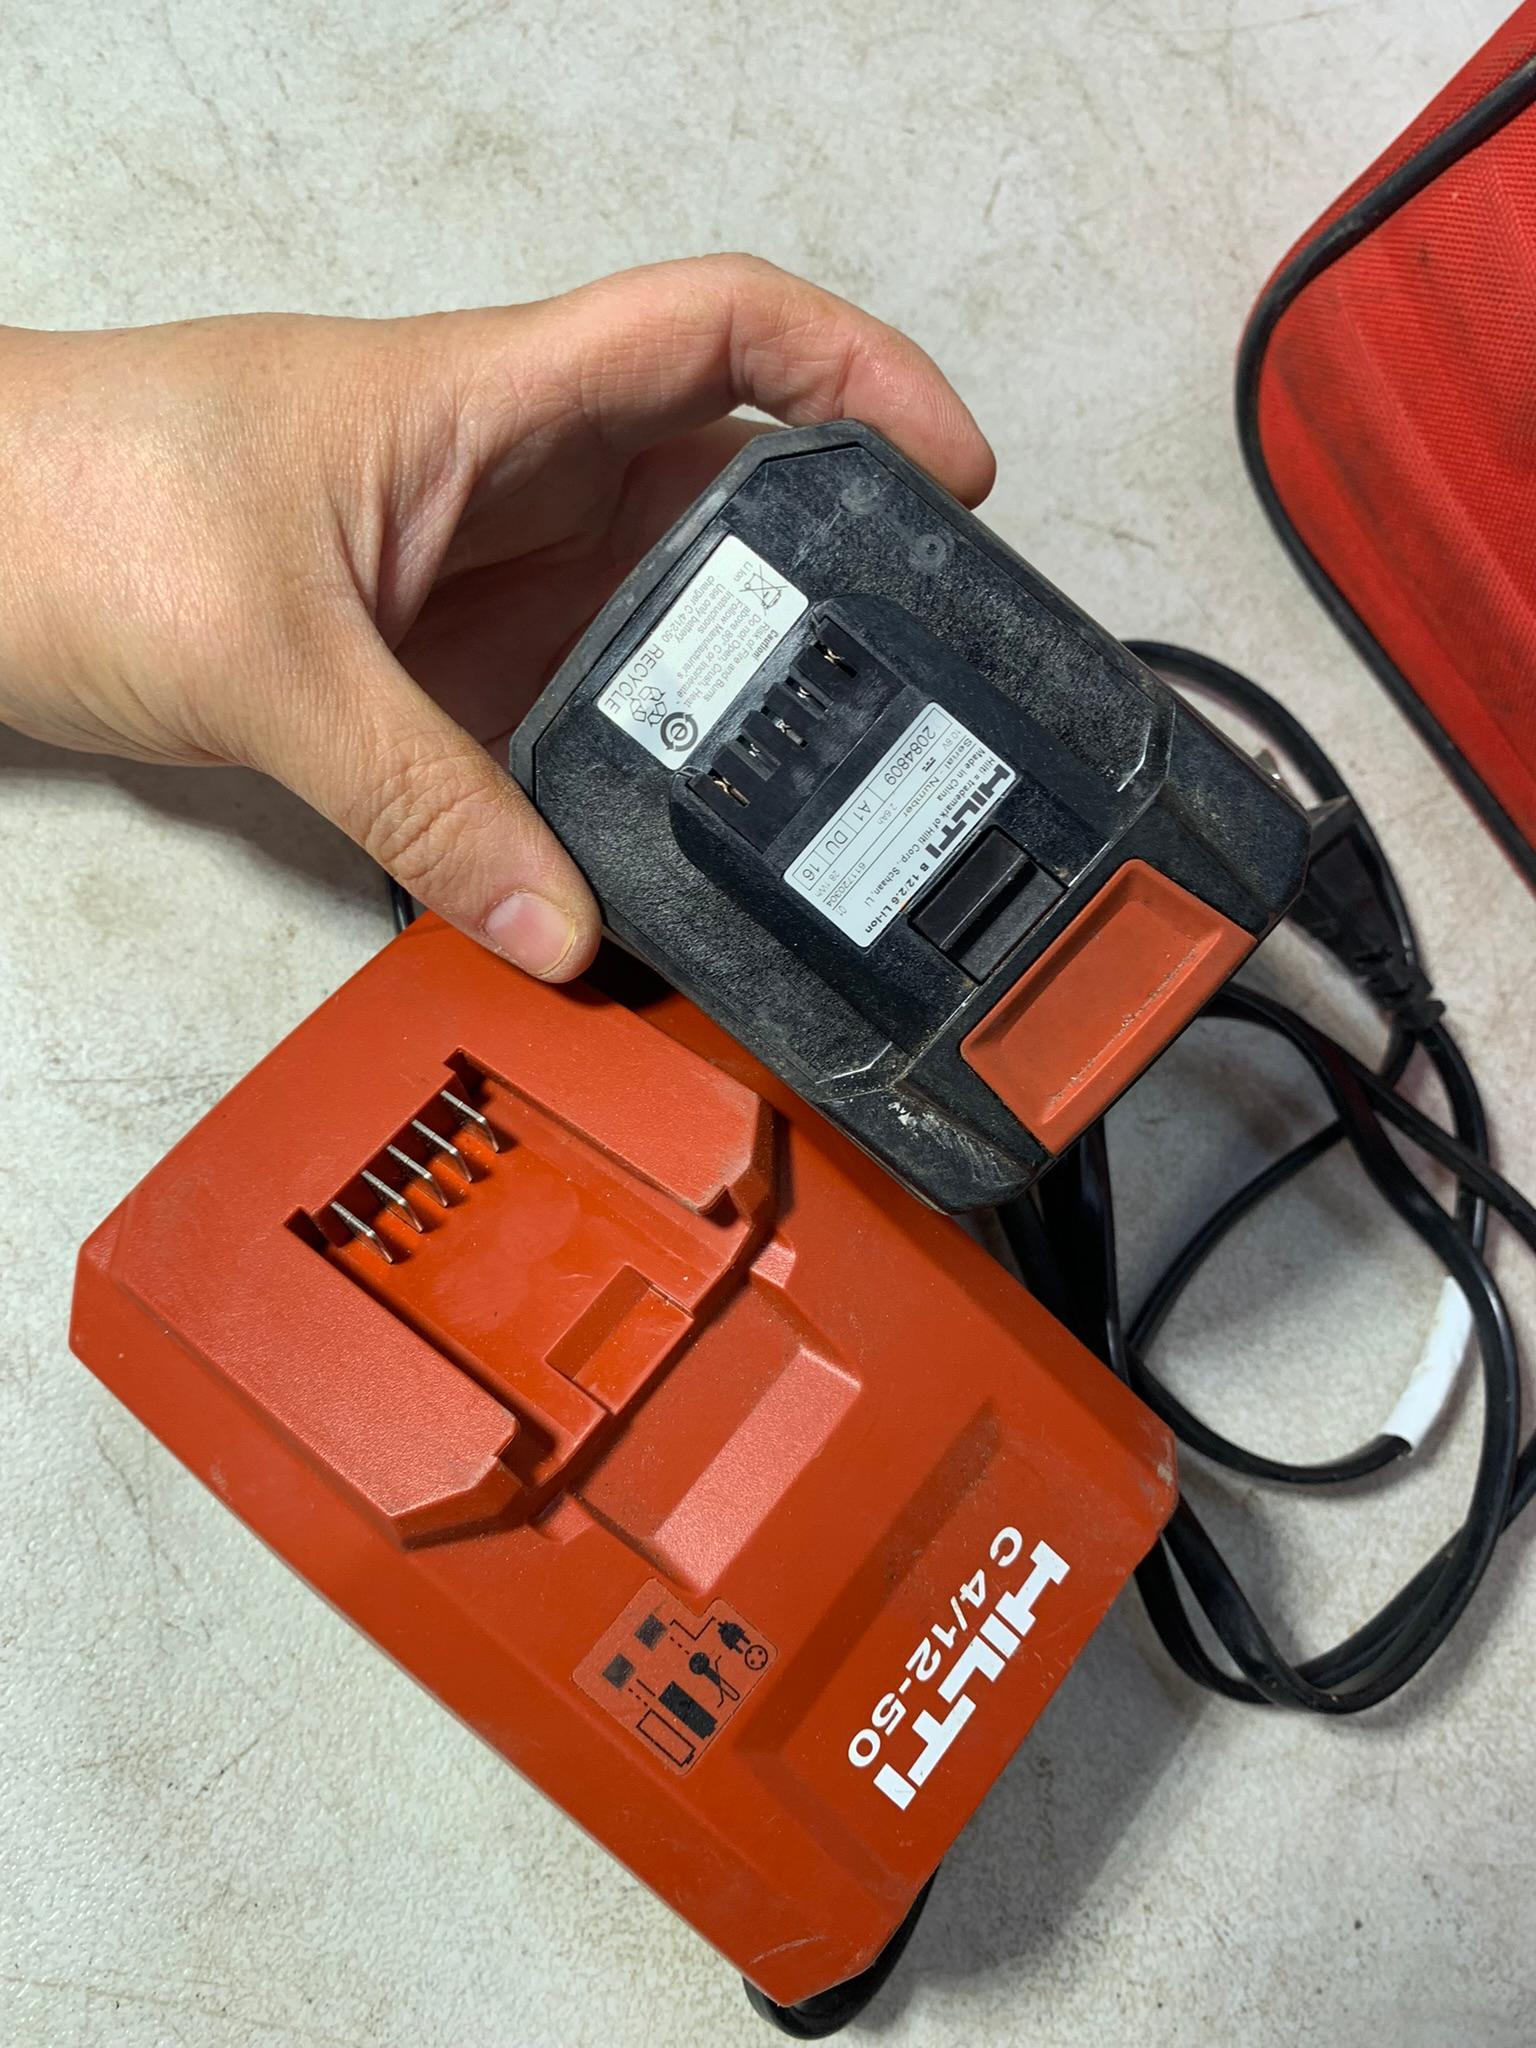 Hilti Impact Driver with Batteries, Charger and Bag